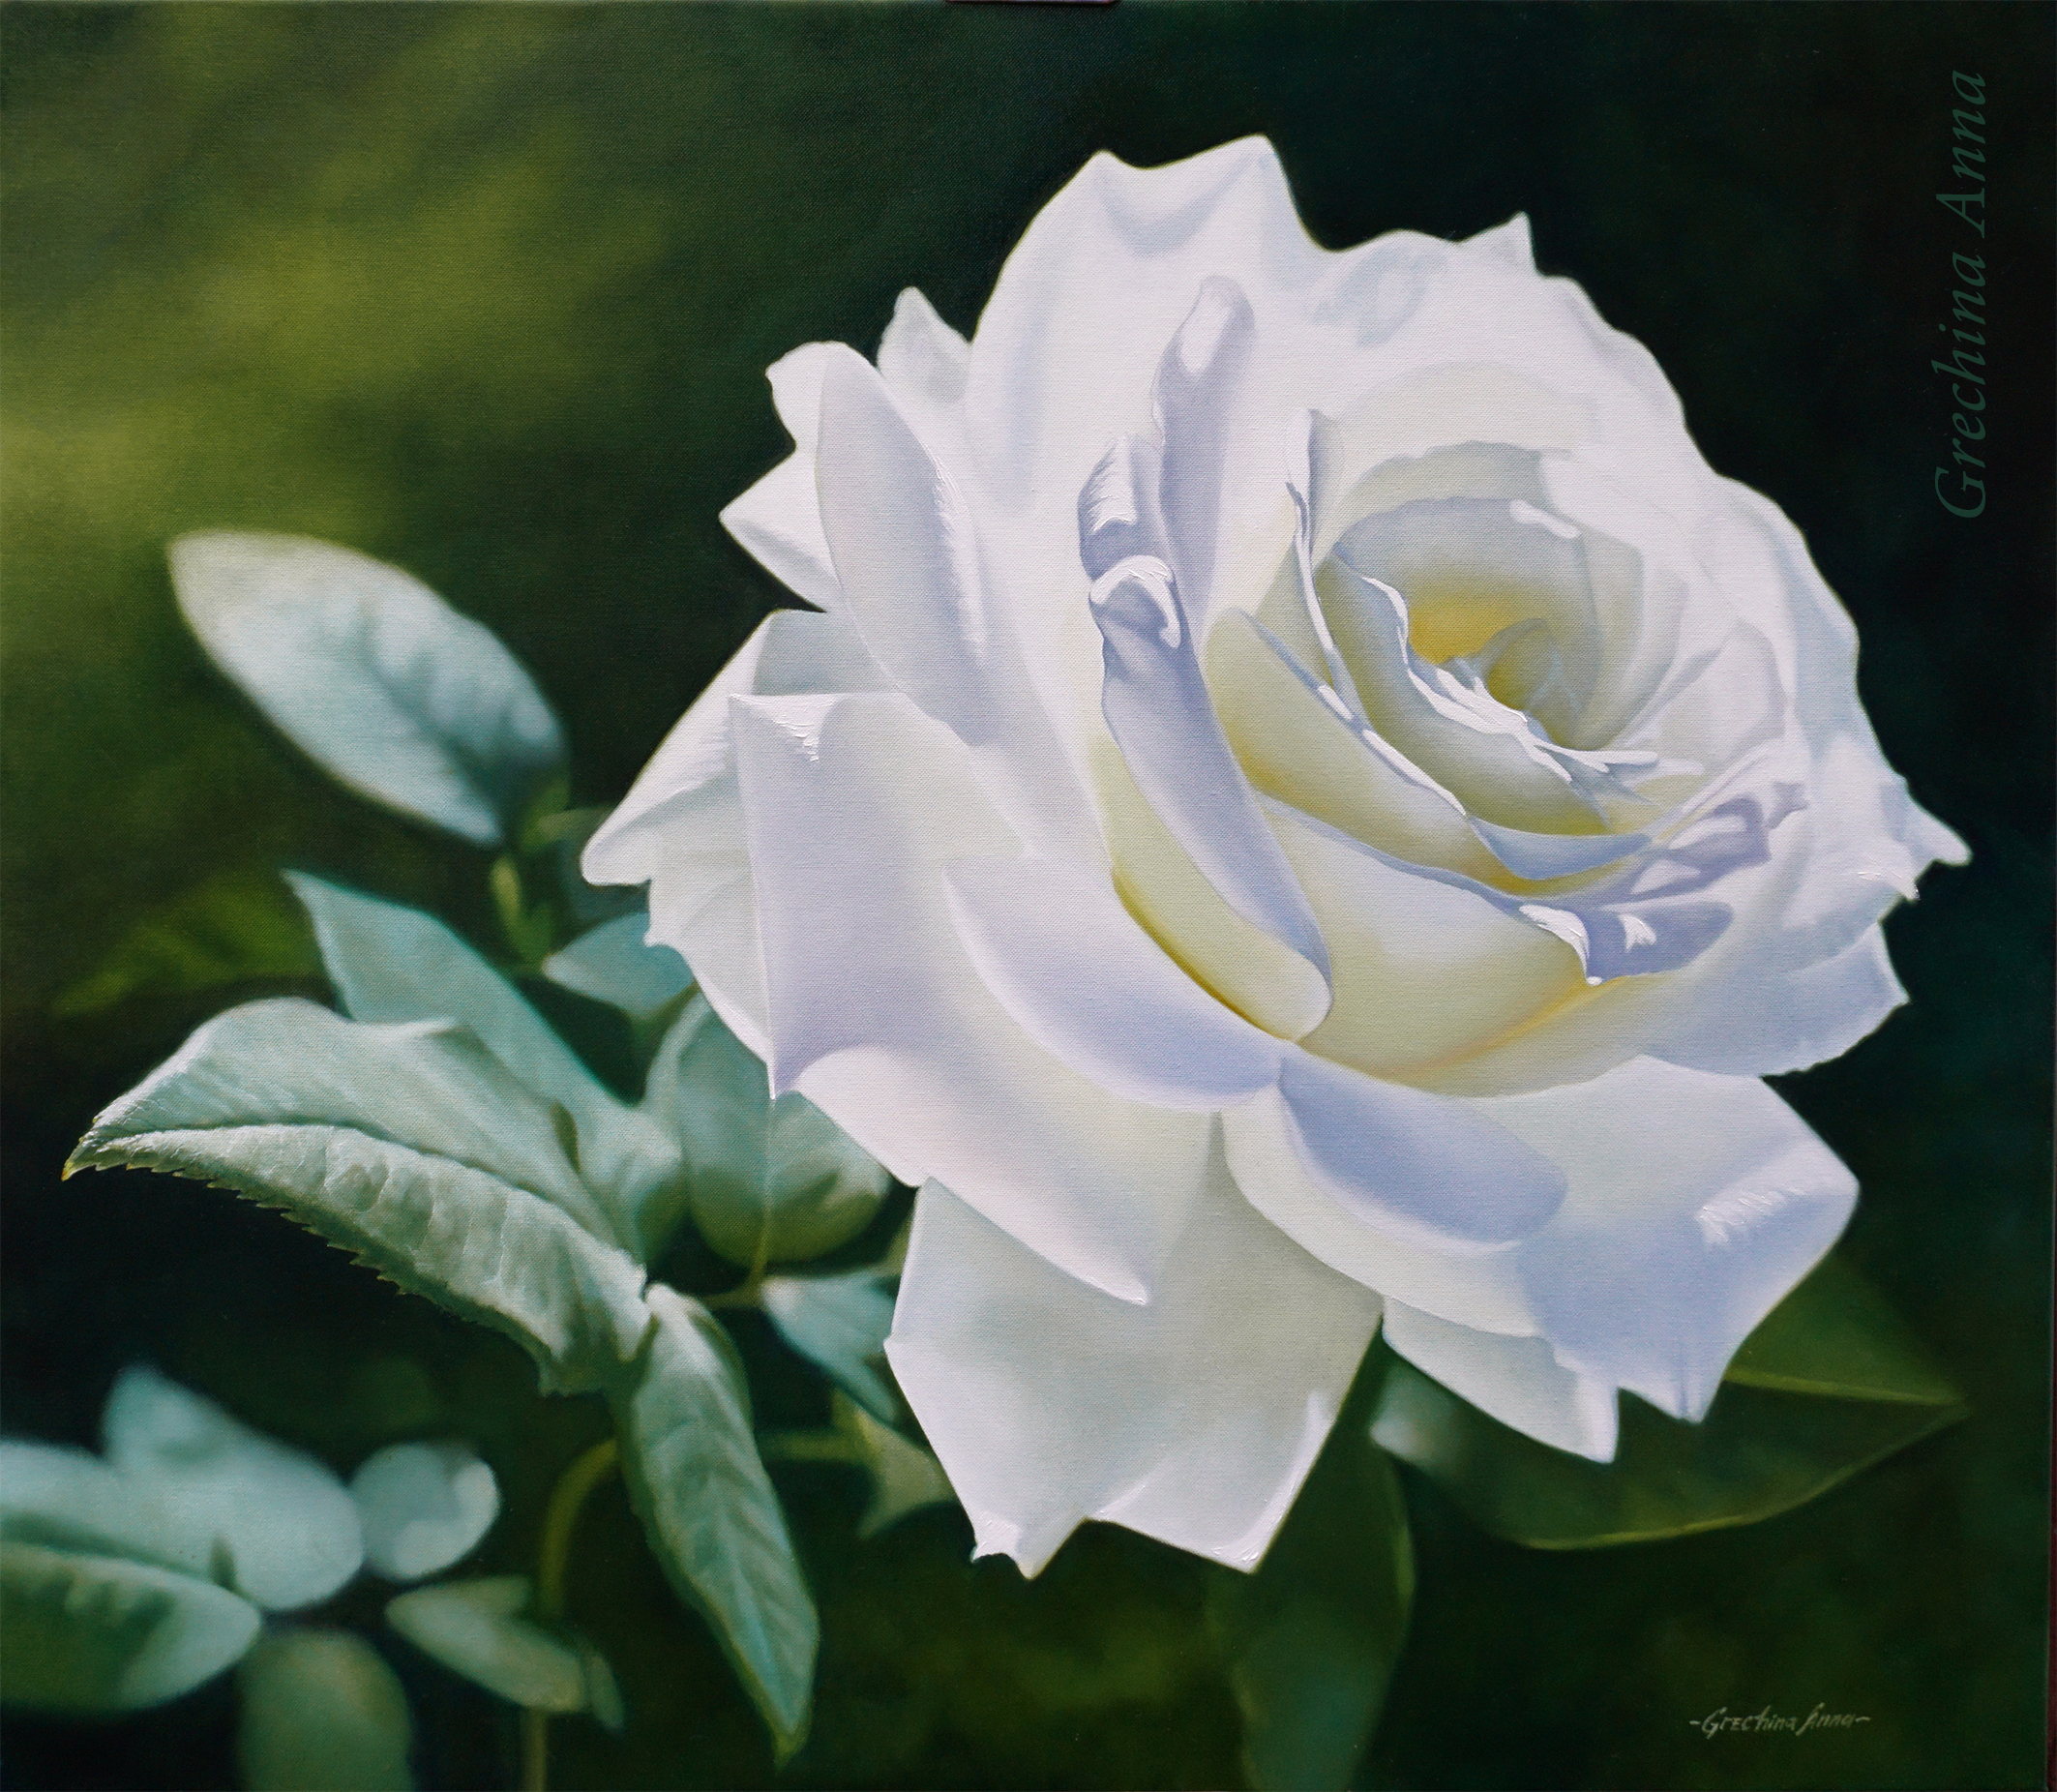 Photorealism in painting. Flowers in the style of "Photorealism", artist Anna Grechina.